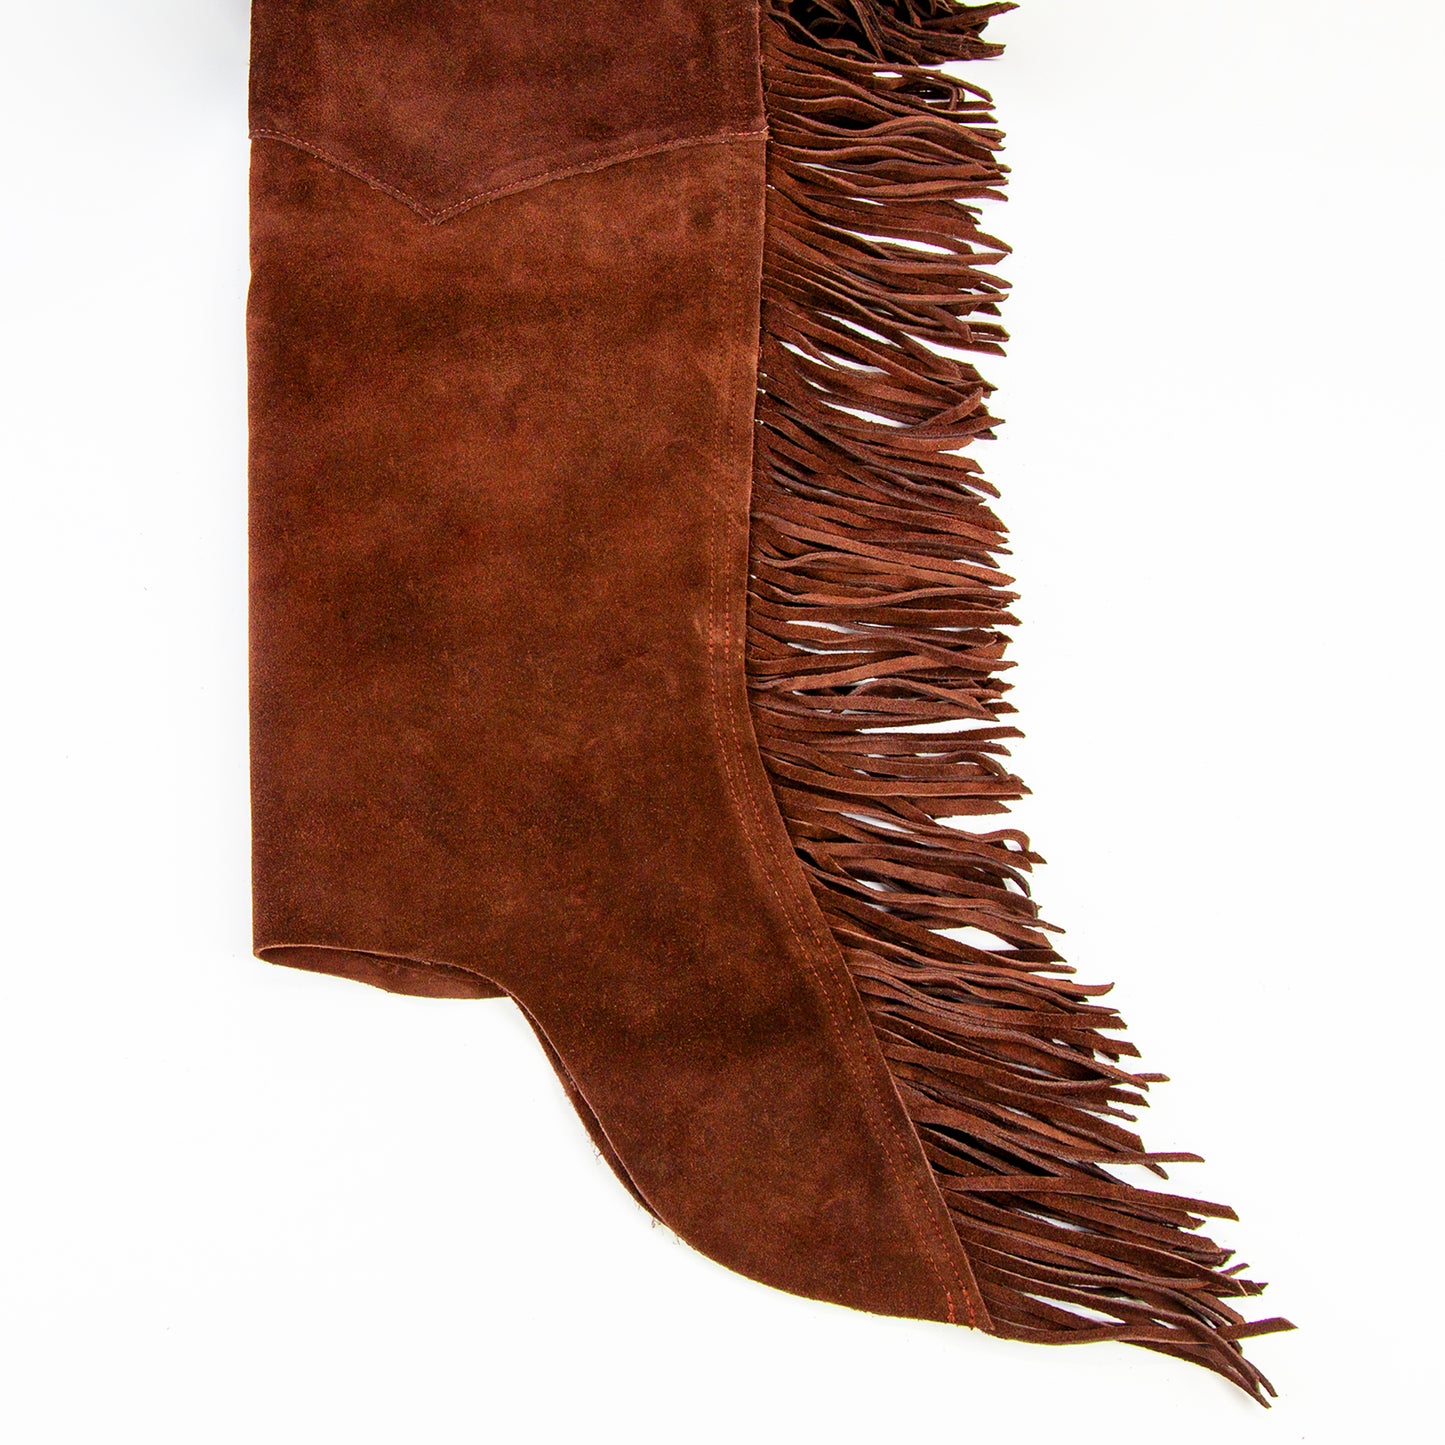 Western Equitation Chaps - Rust Suede - Fringe - Double Concho